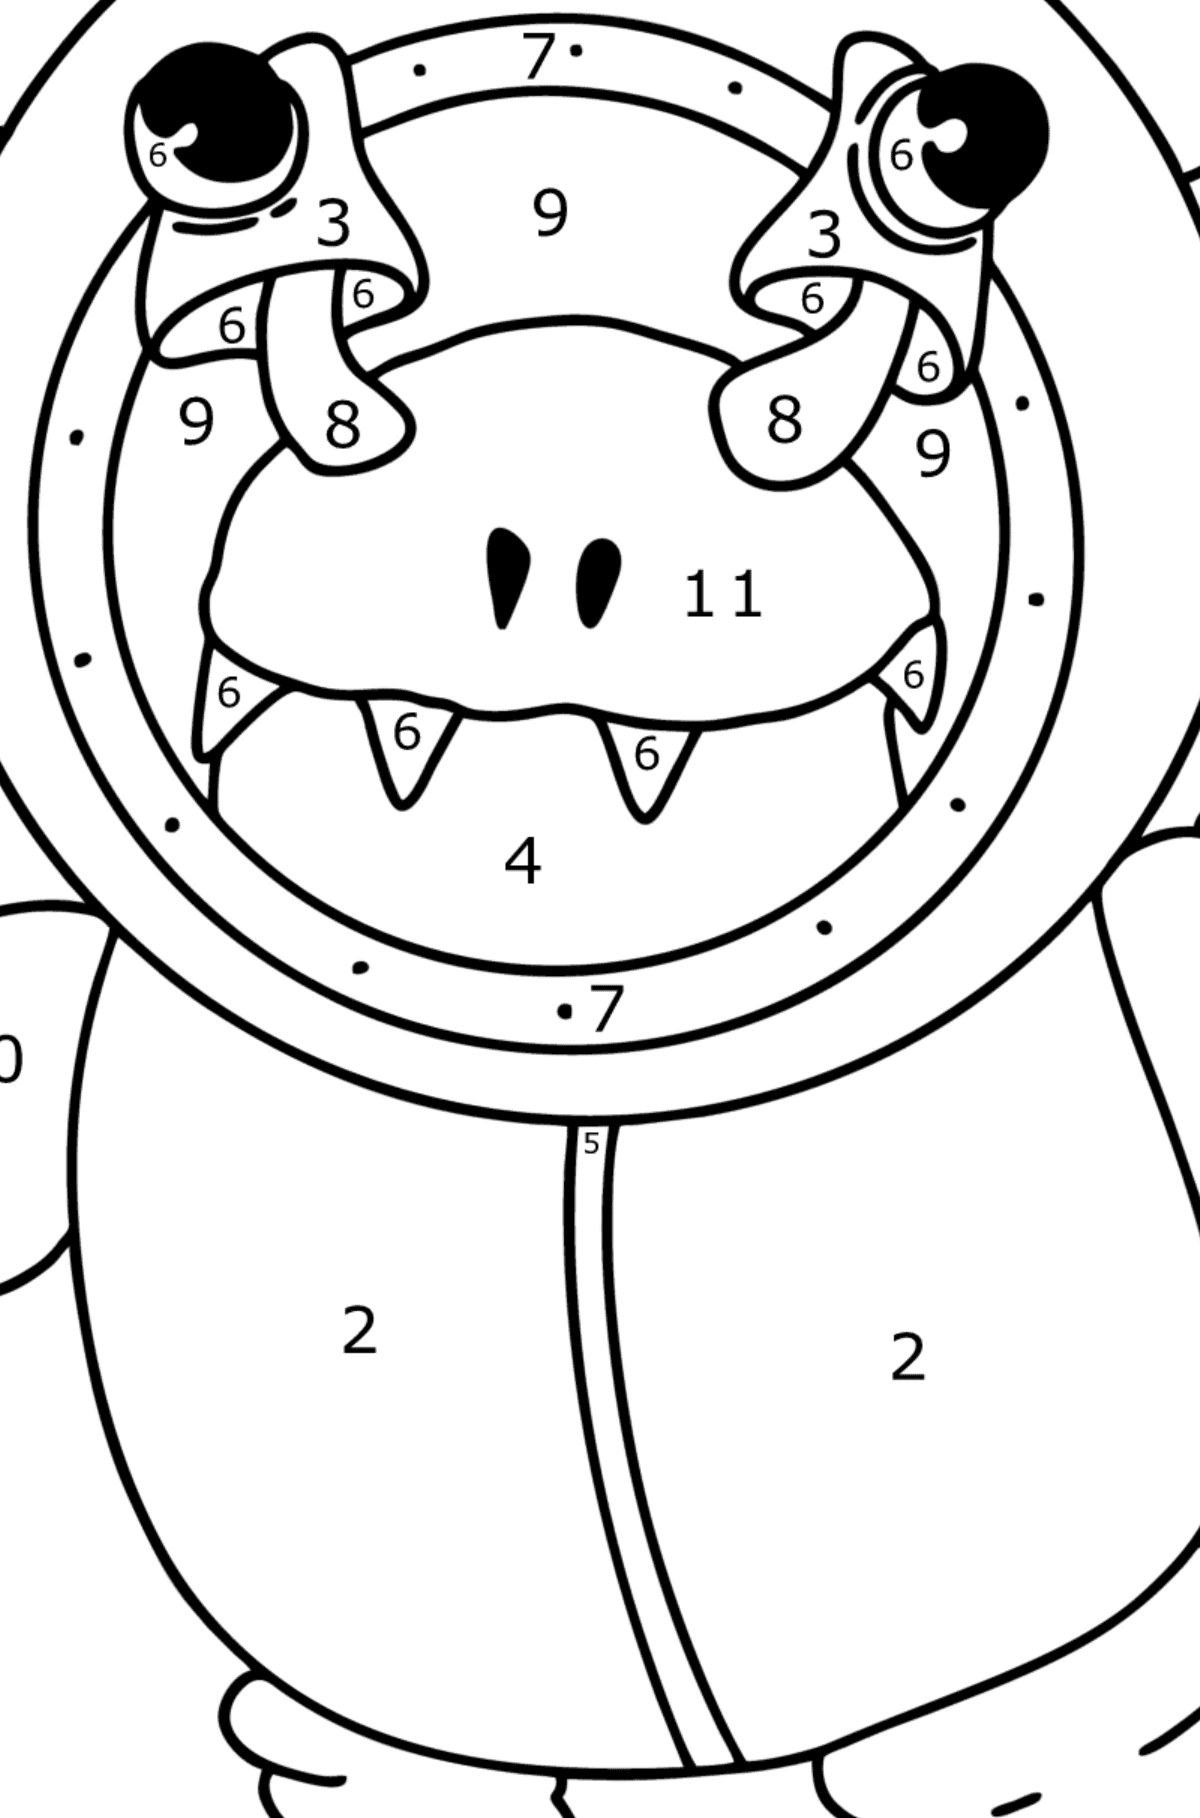 Coloring page alien in spacesuit - Coloring by Numbers for Kids